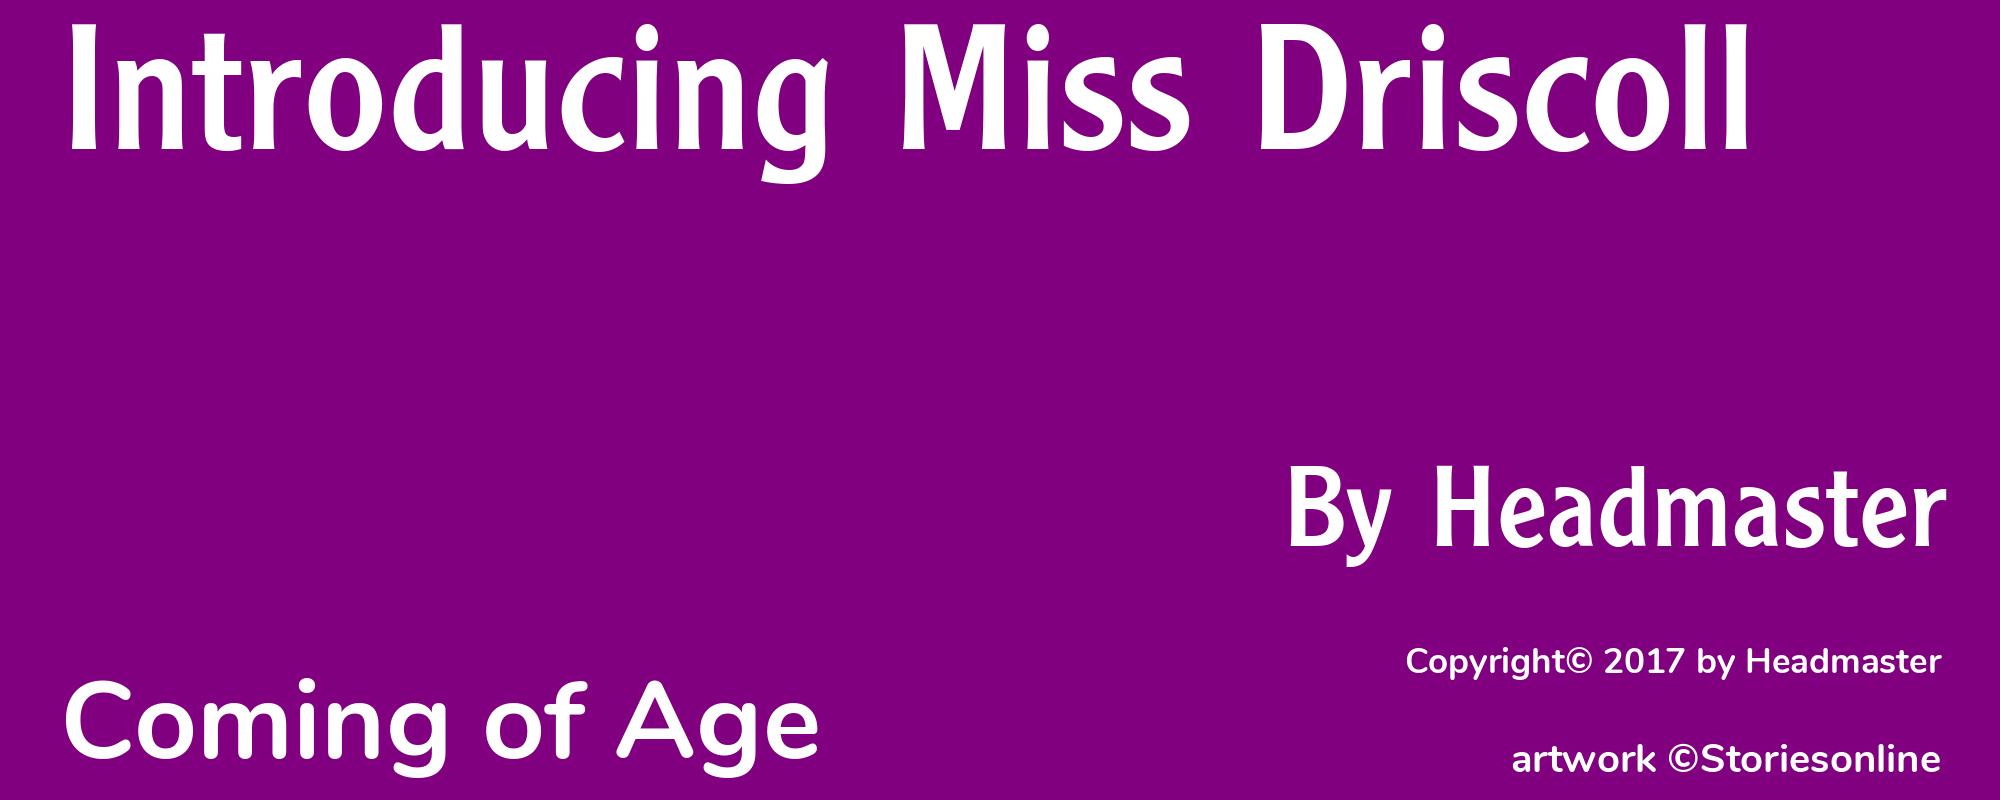 Introducing Miss Driscoll - Cover